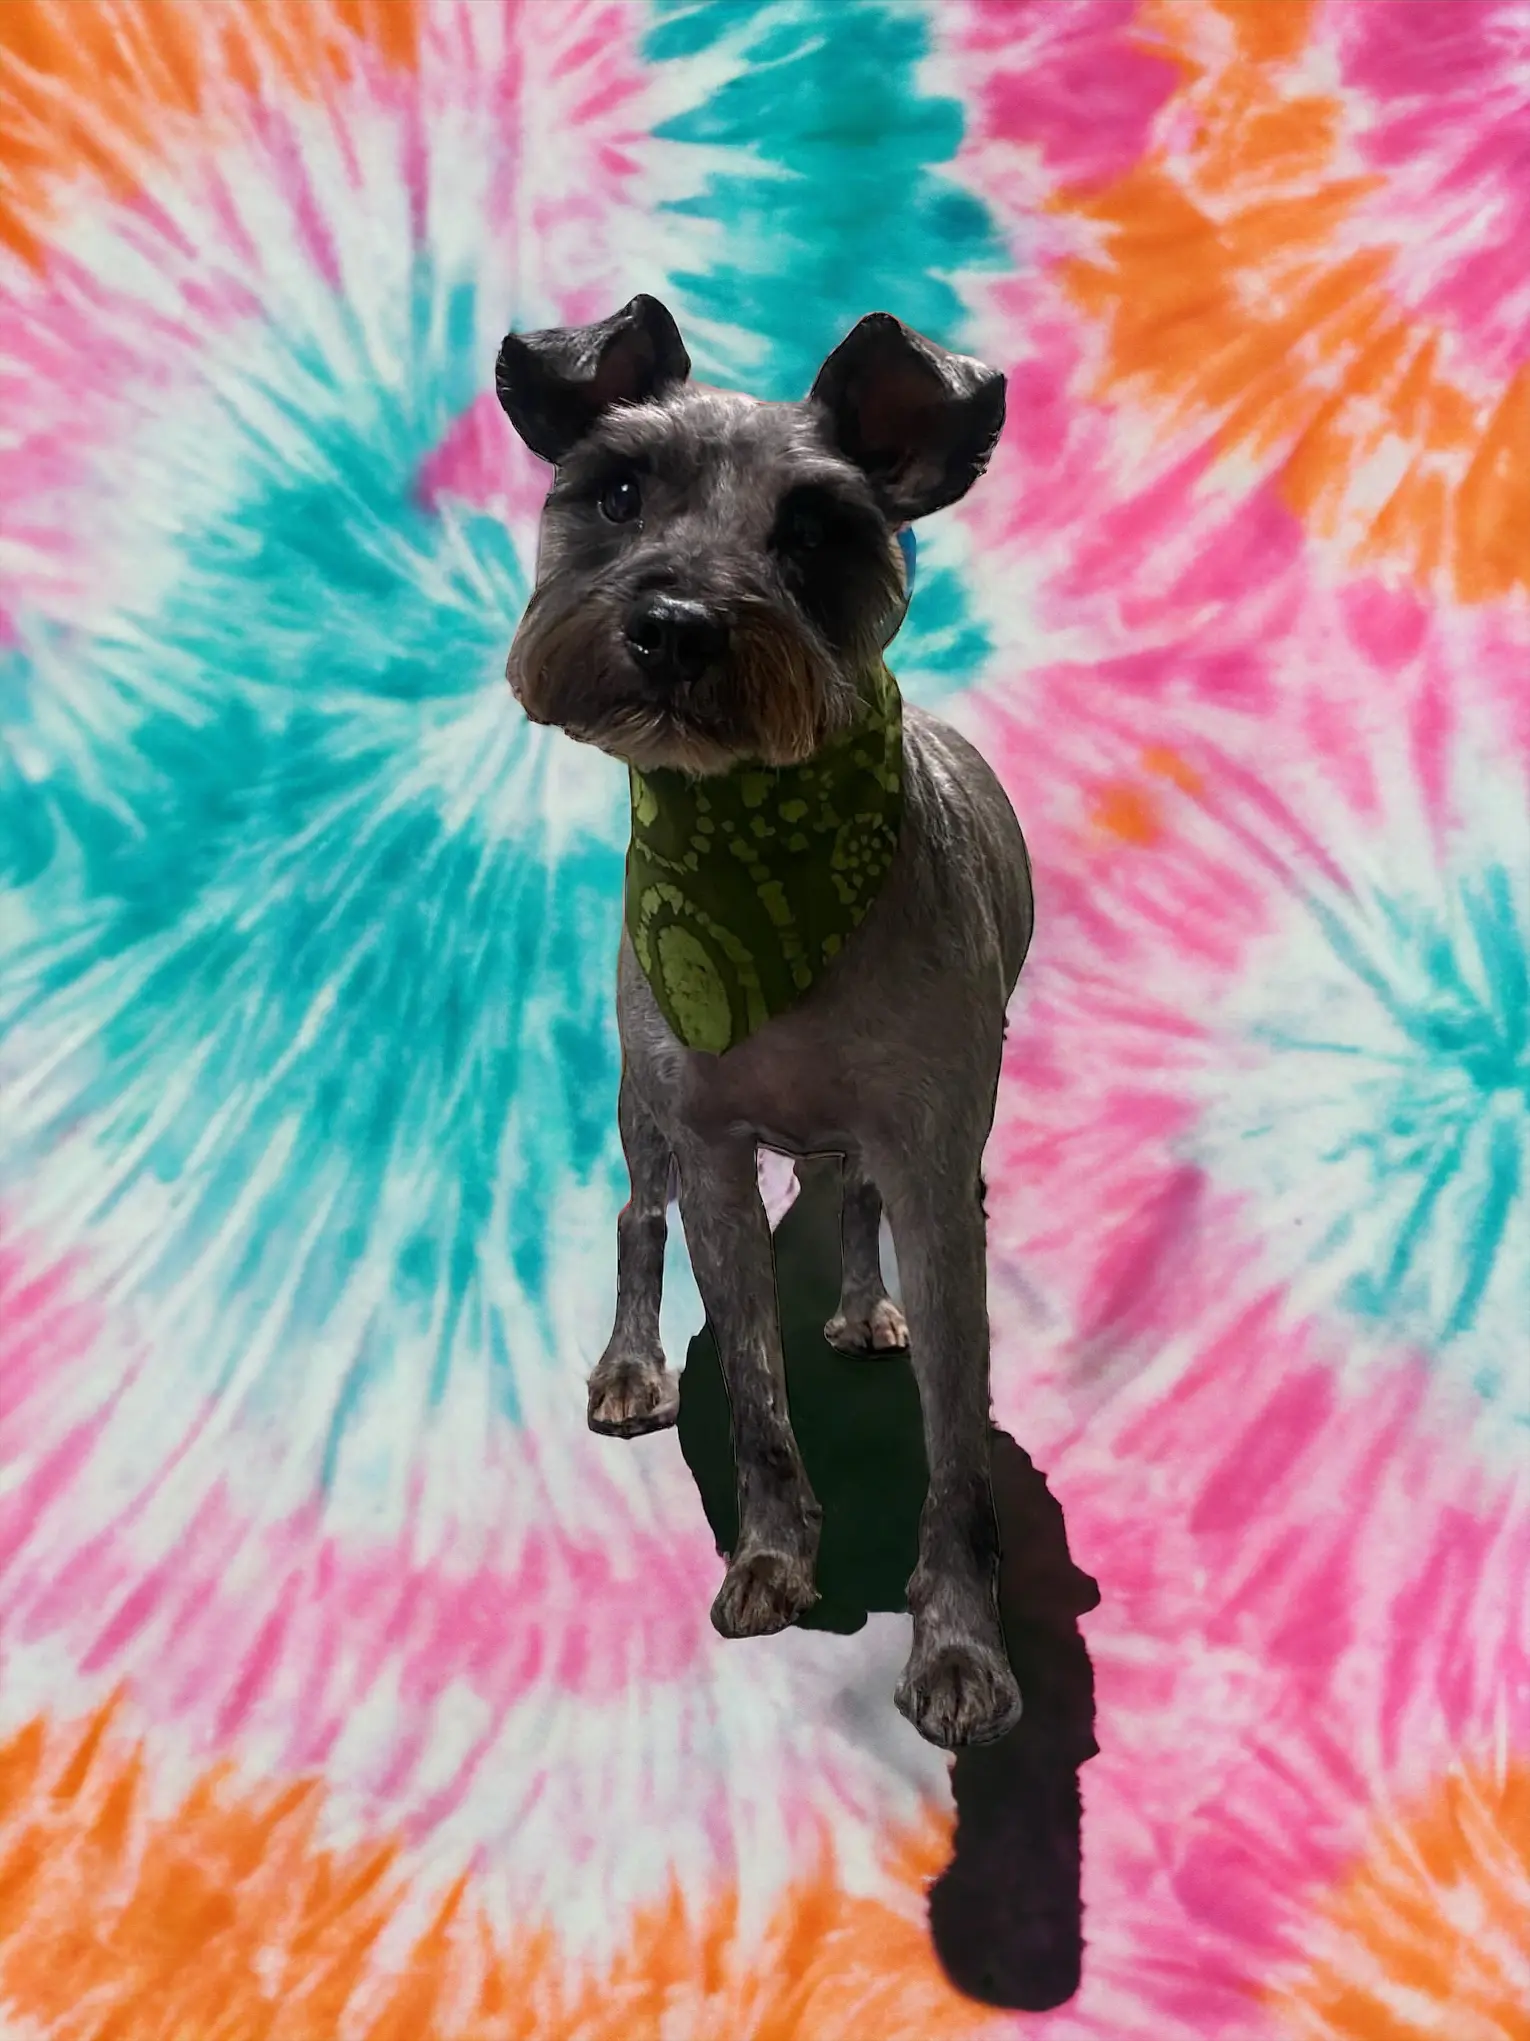 A freshly groomed cute small gray dog with a green bandana on its neck and a tie dye background.